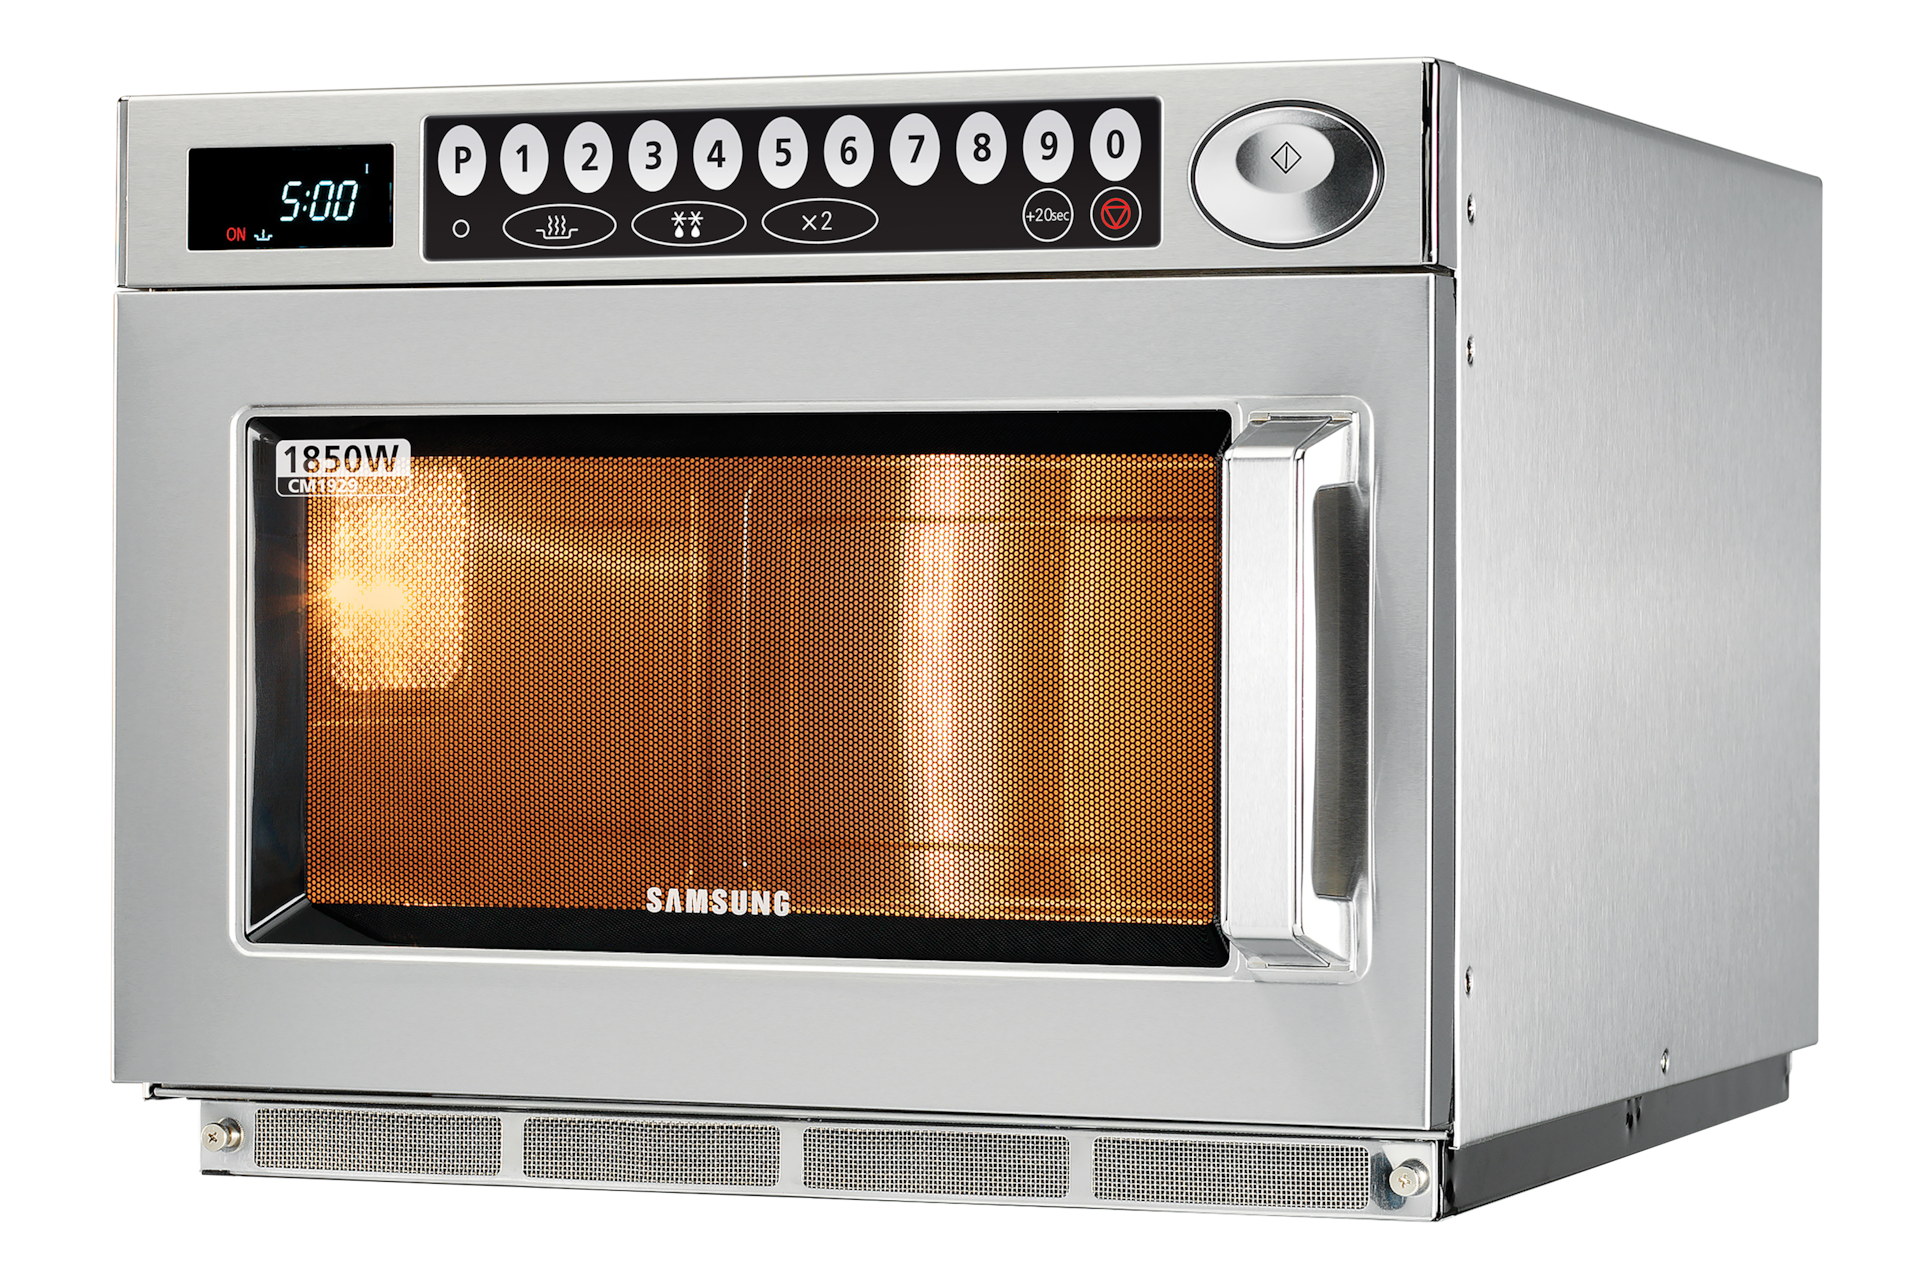 CM1929 Commercial Microwave Oven 1850W, 26L (Stackable) | Samsung Support UK3000 x 2000